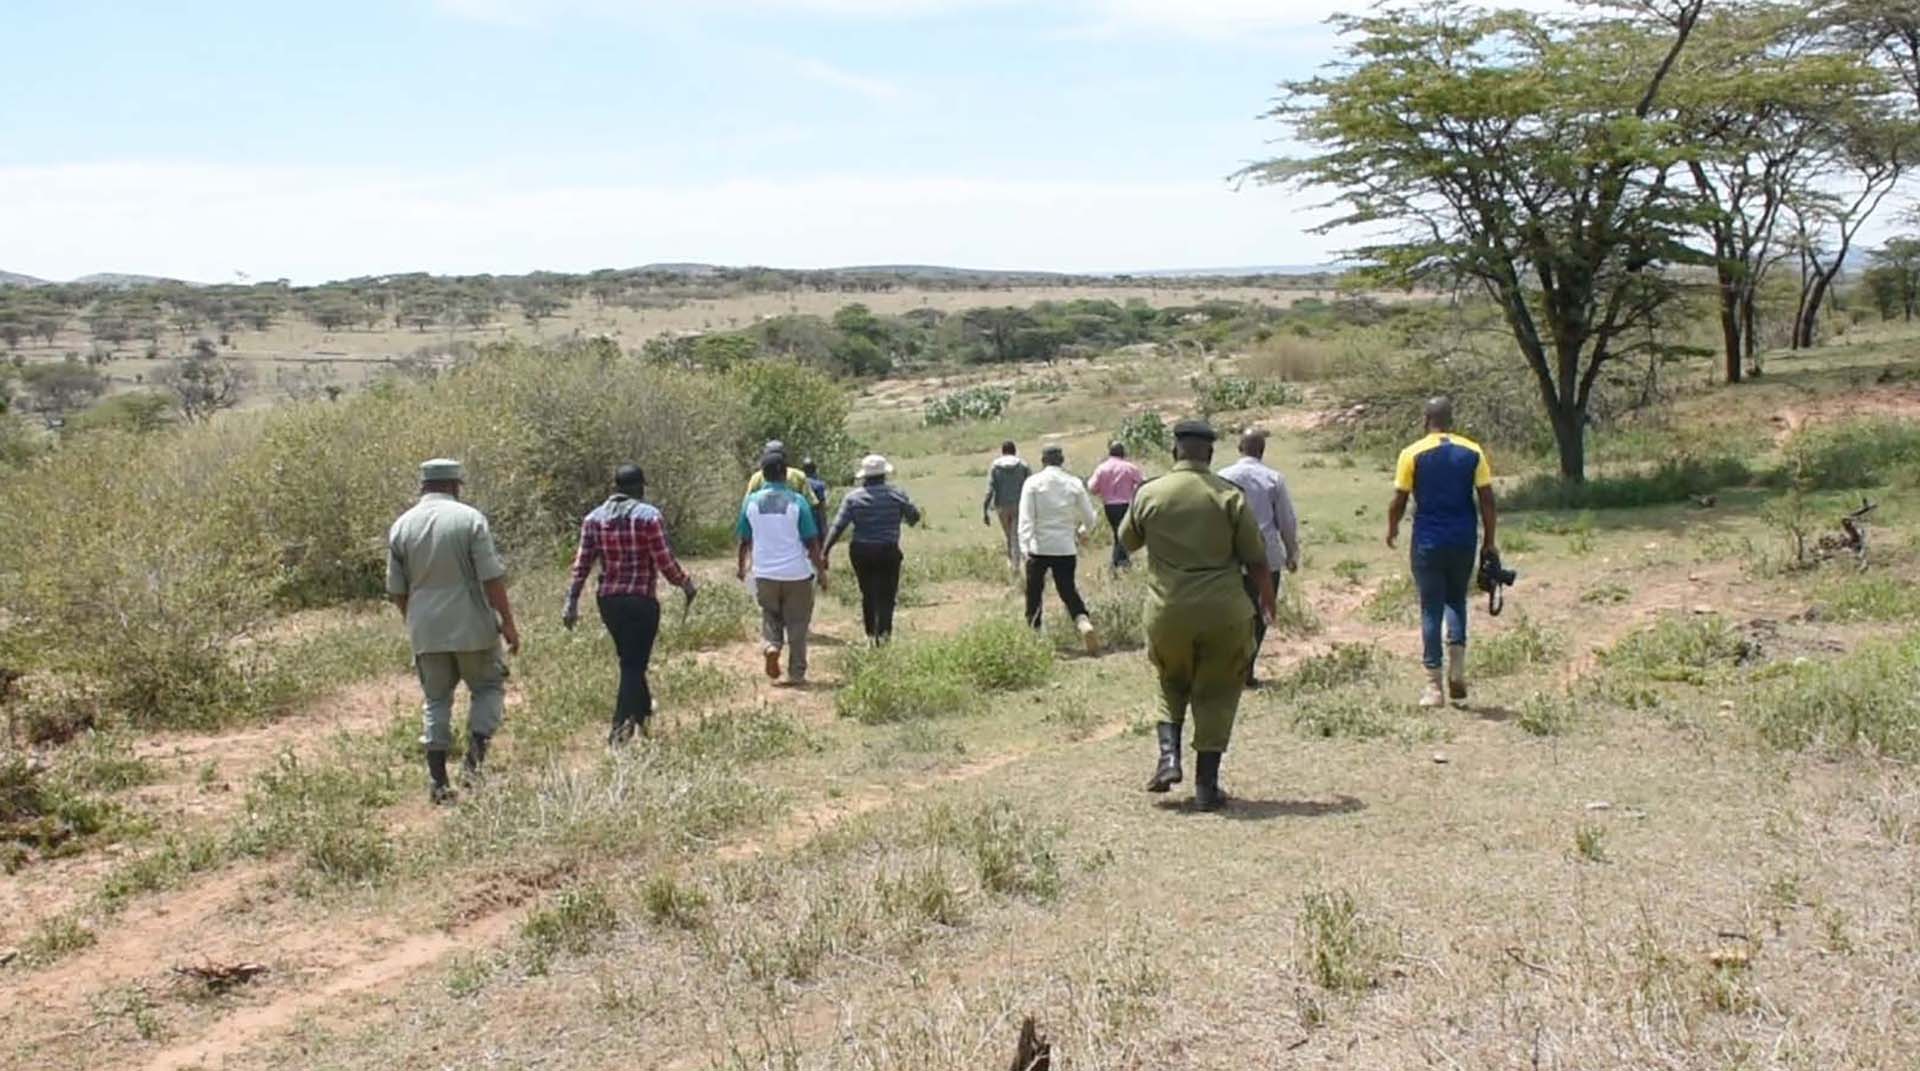 Media Statement On The Threats Of Eviction Of Maasai Pastoralists In Lo-liondo Area And The Ngorongoro National Park In Tanzania